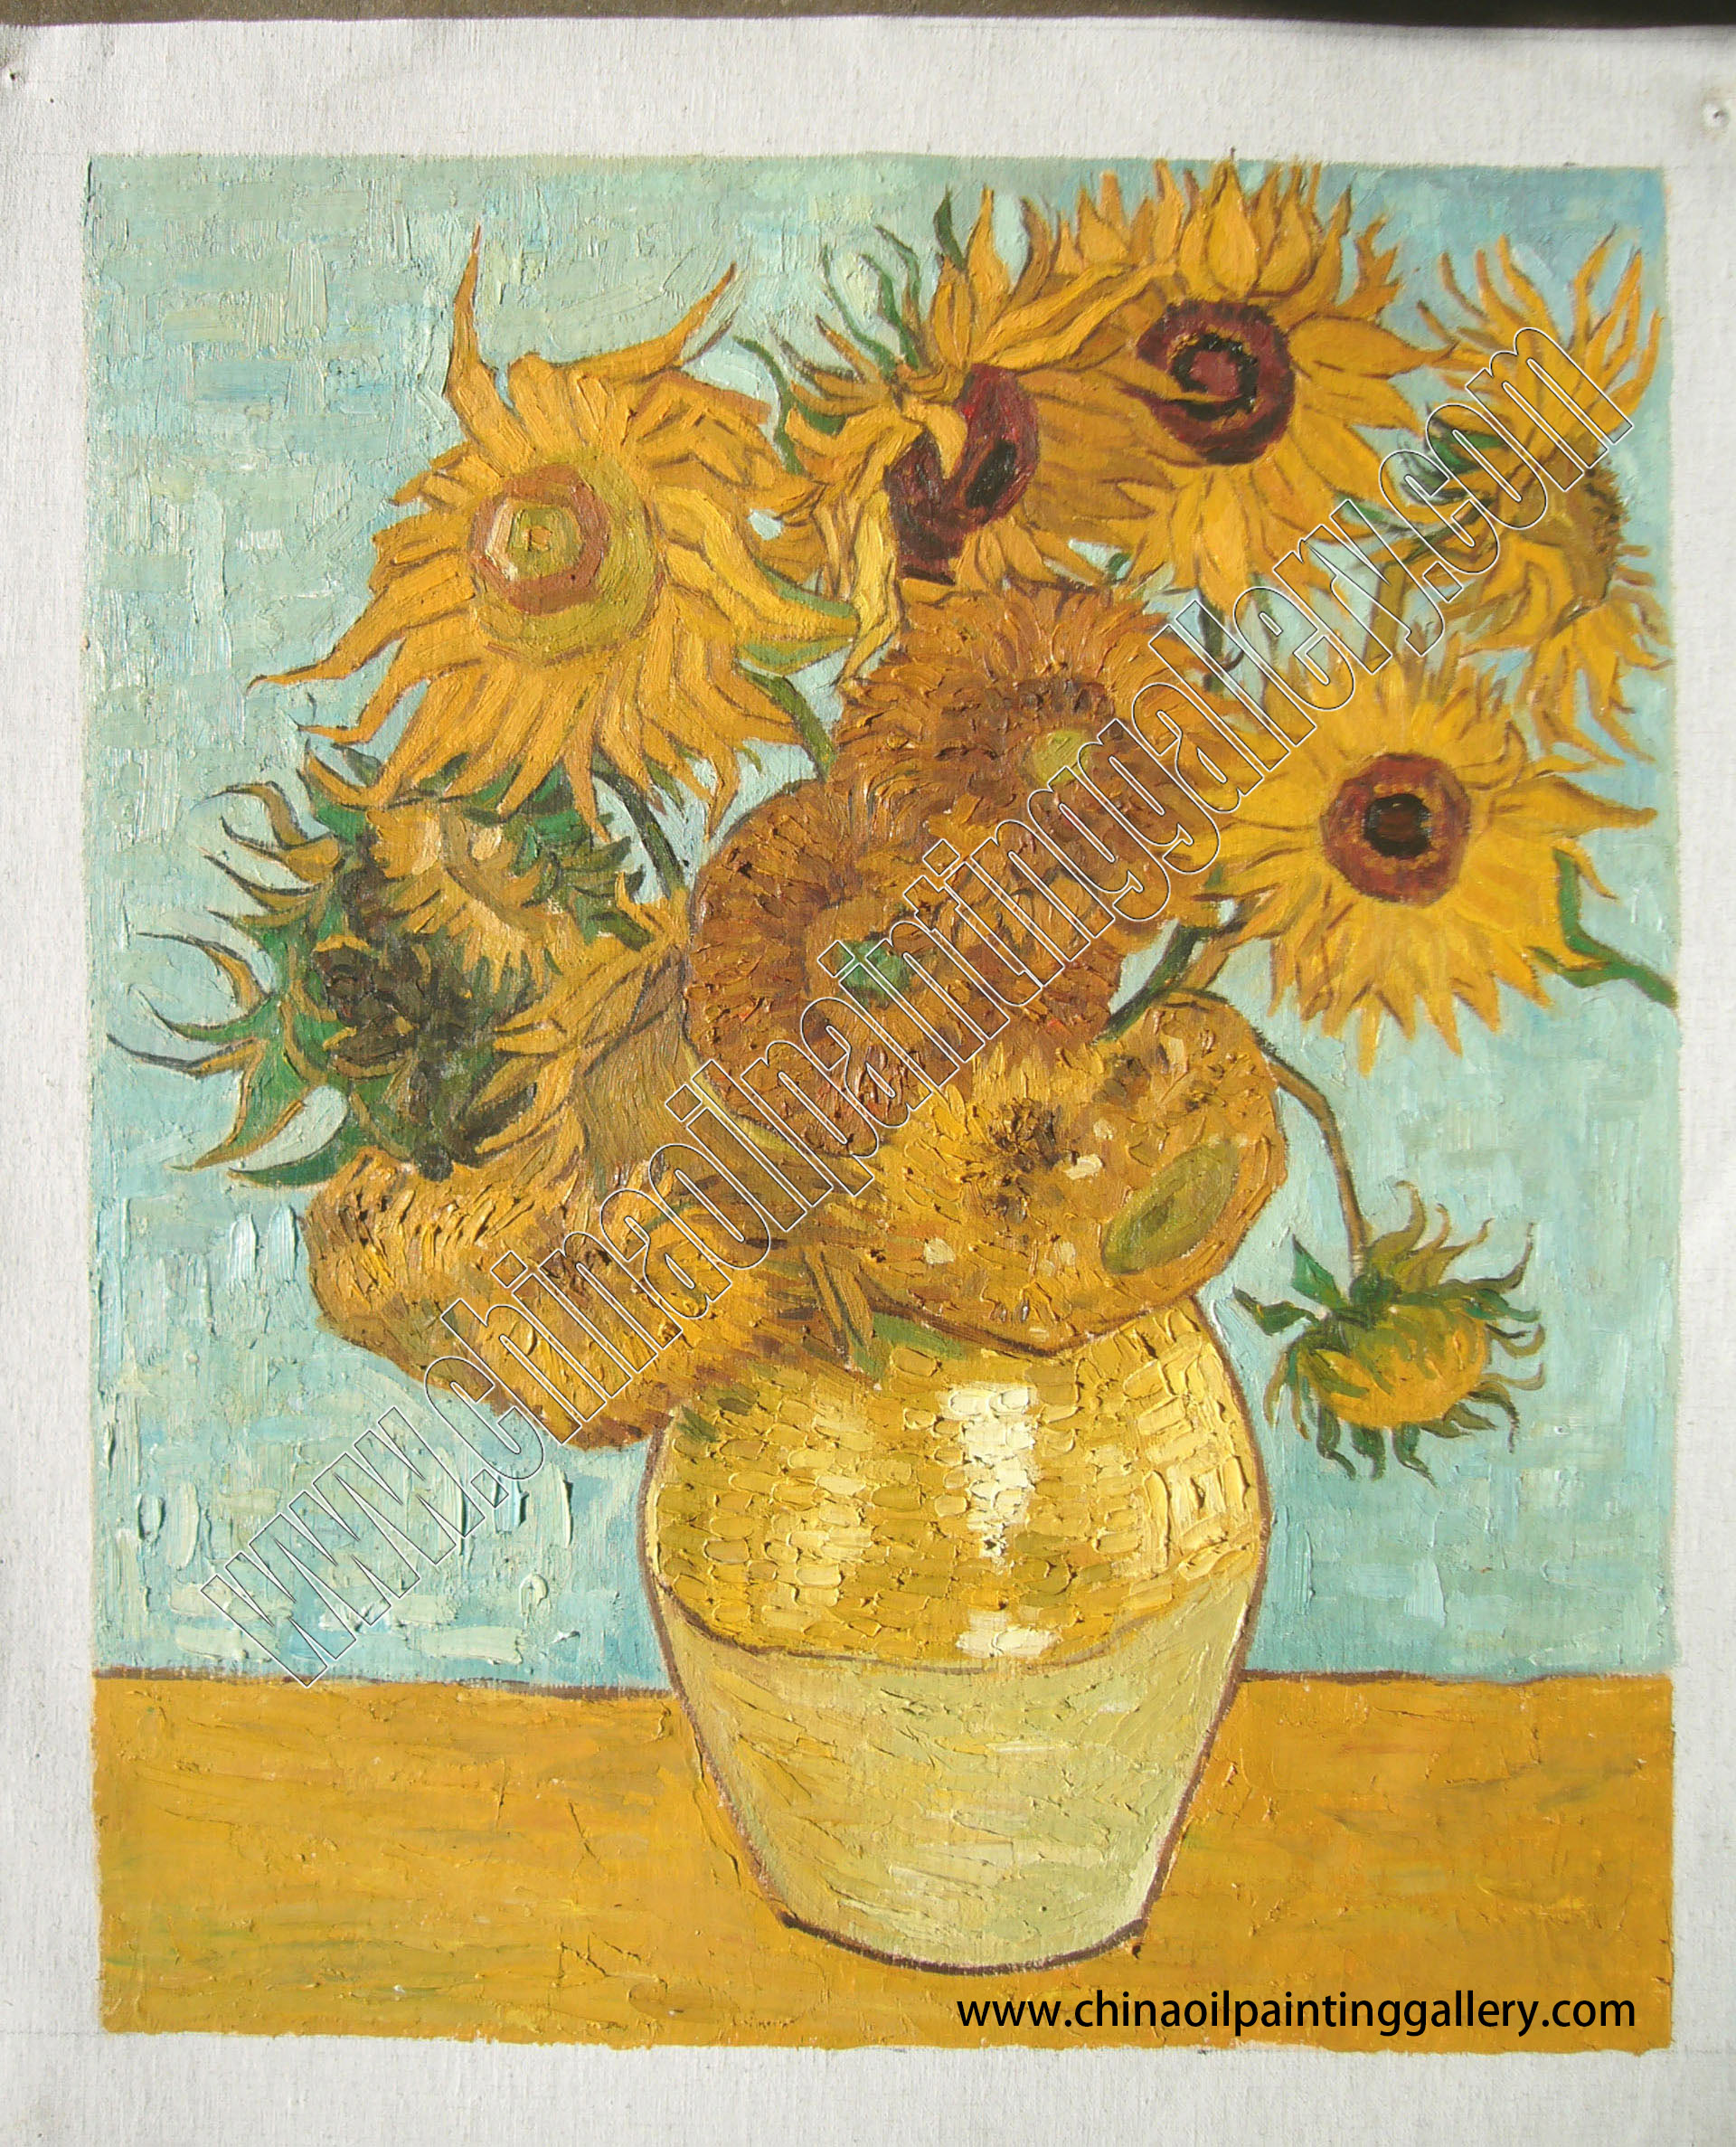 Vincent van Gogh Sunflowers - Oil painting reproductions 10